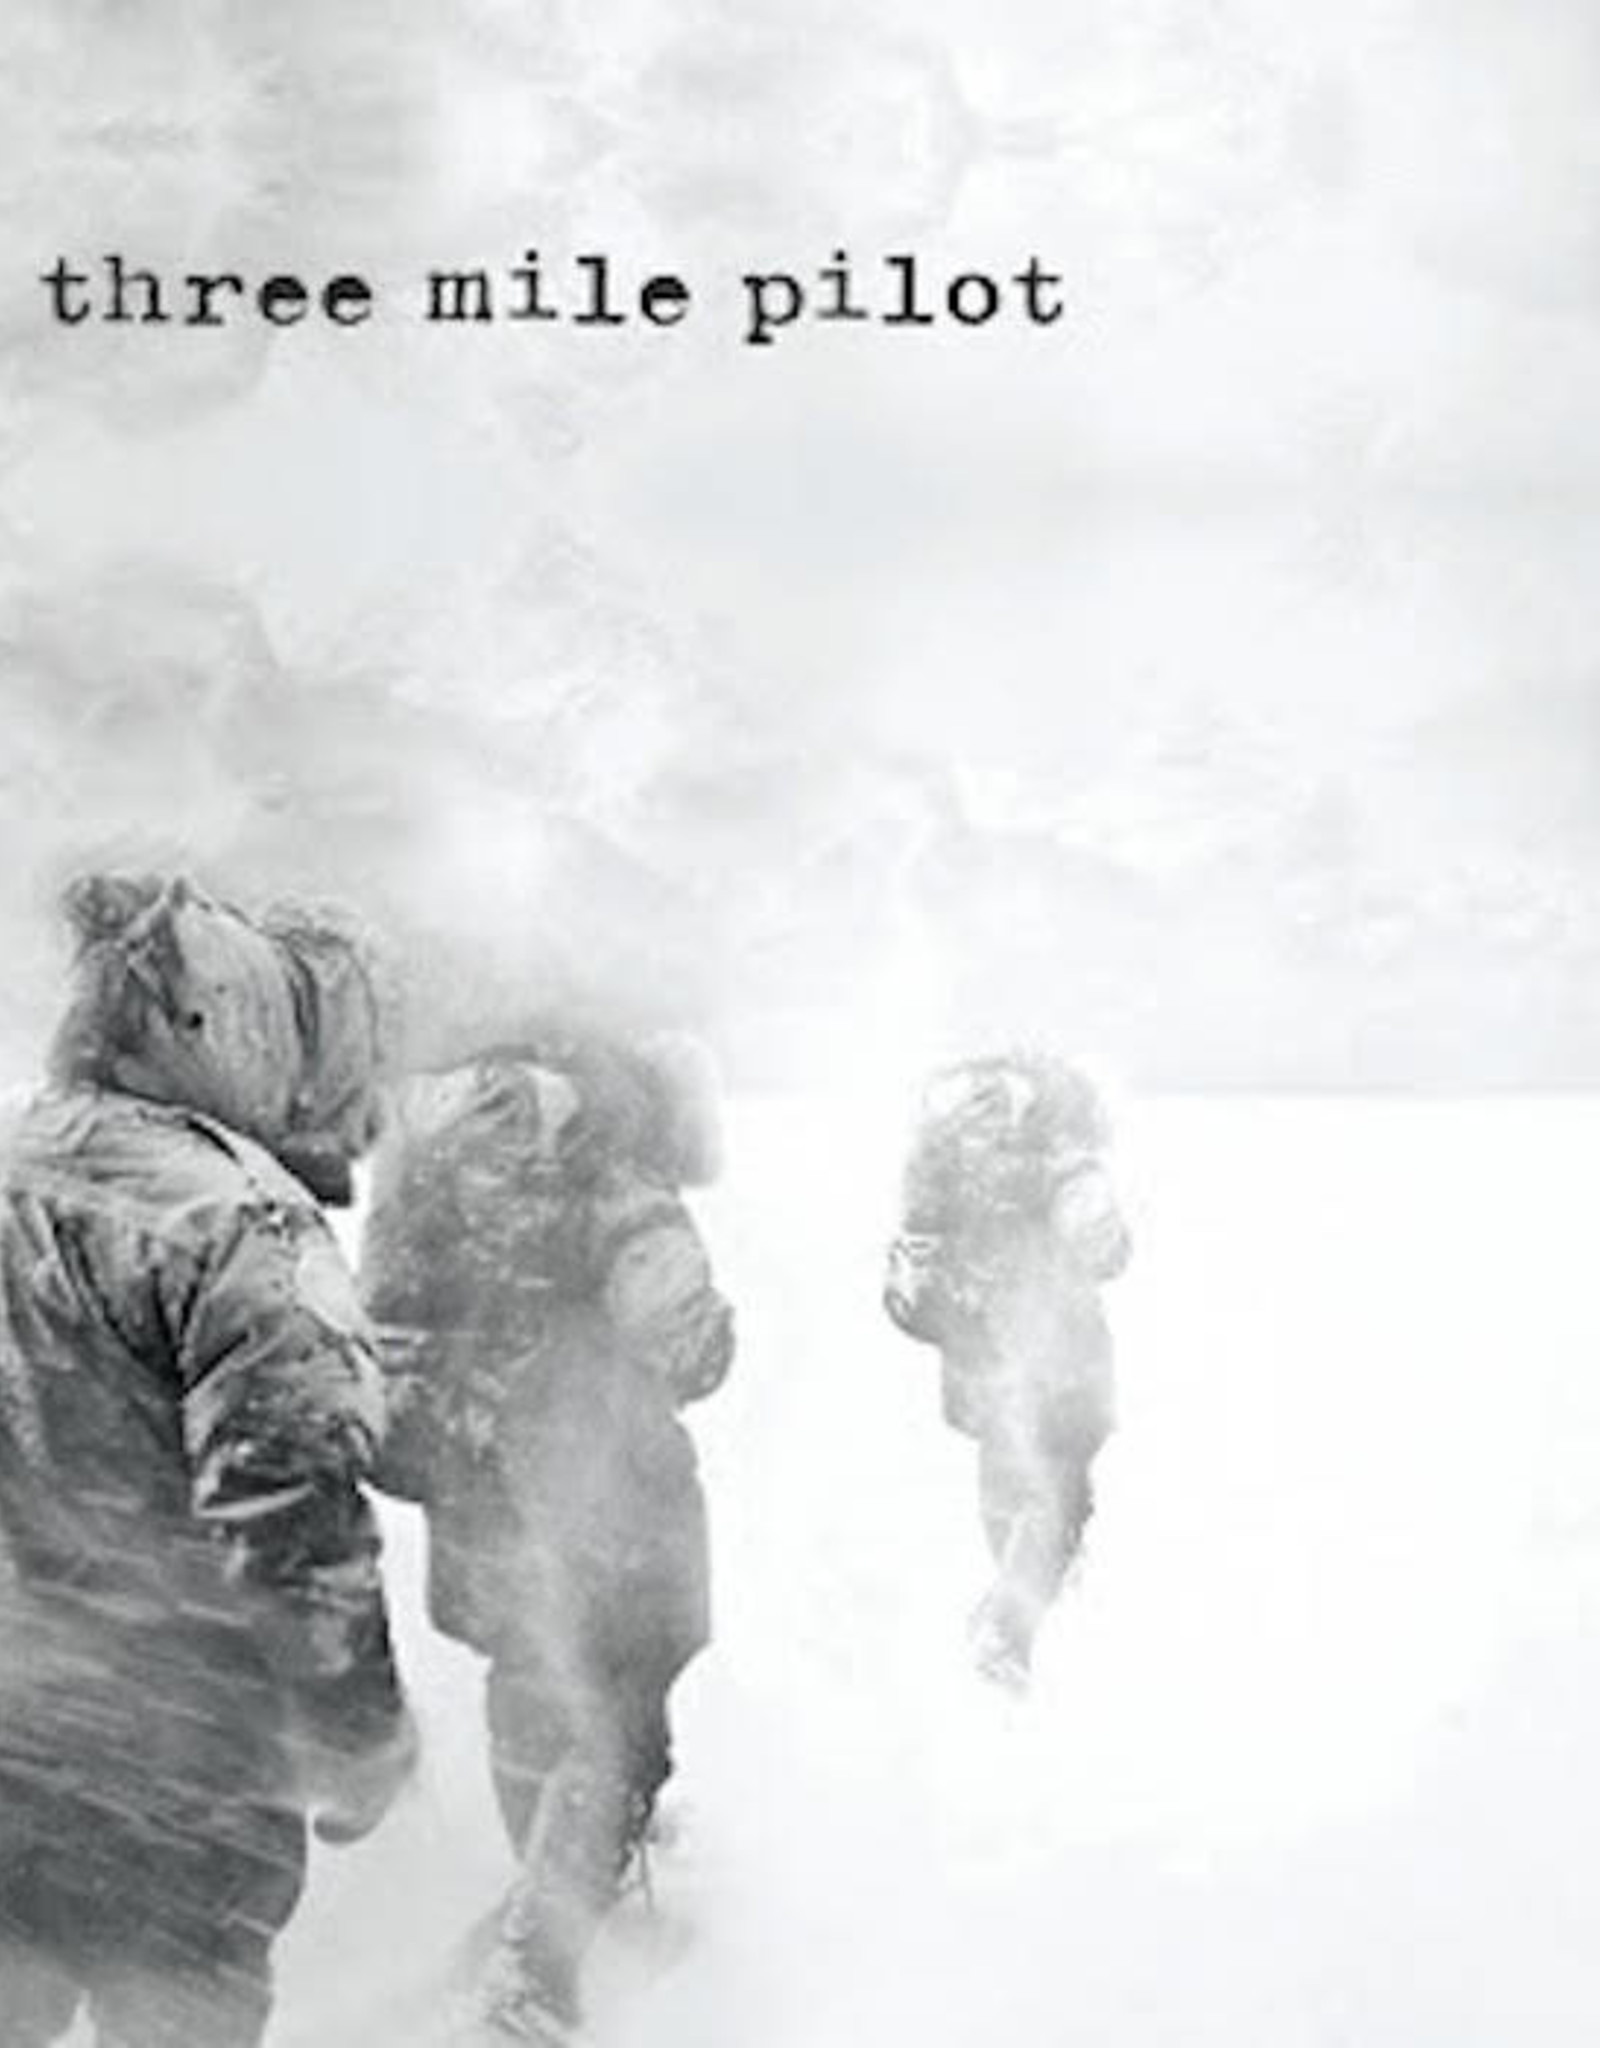 Three Mile Pilot - Planets / Grey Clouds